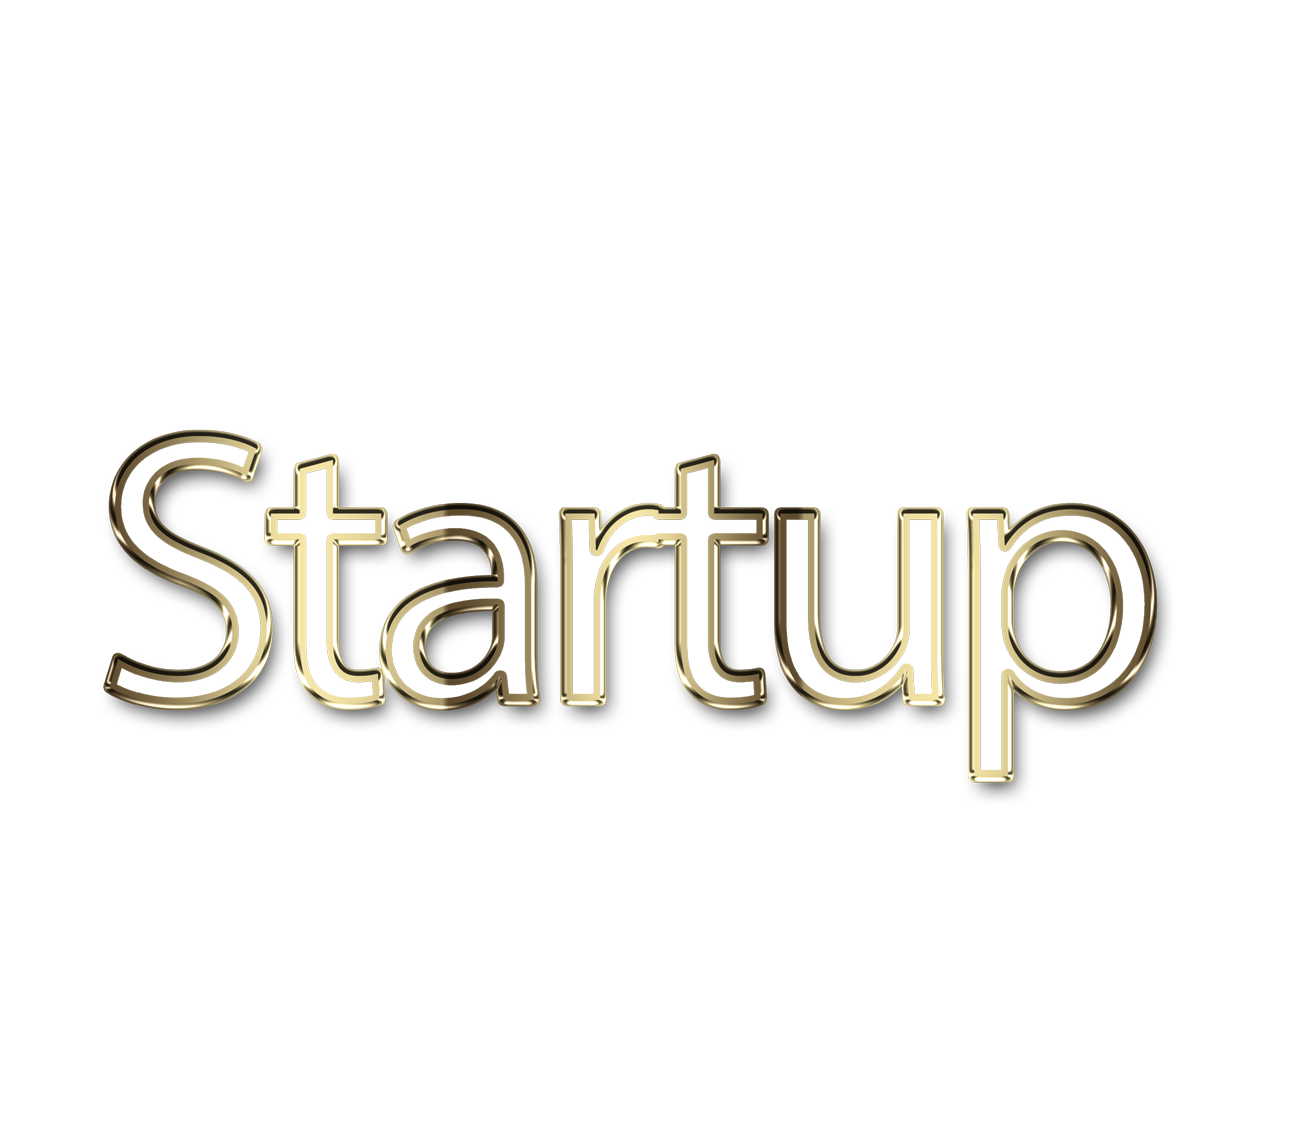 Startup png, word Startup png, Startup word png, Startup text png, Startup letters png, Startup word art typography PNG images, transparent png